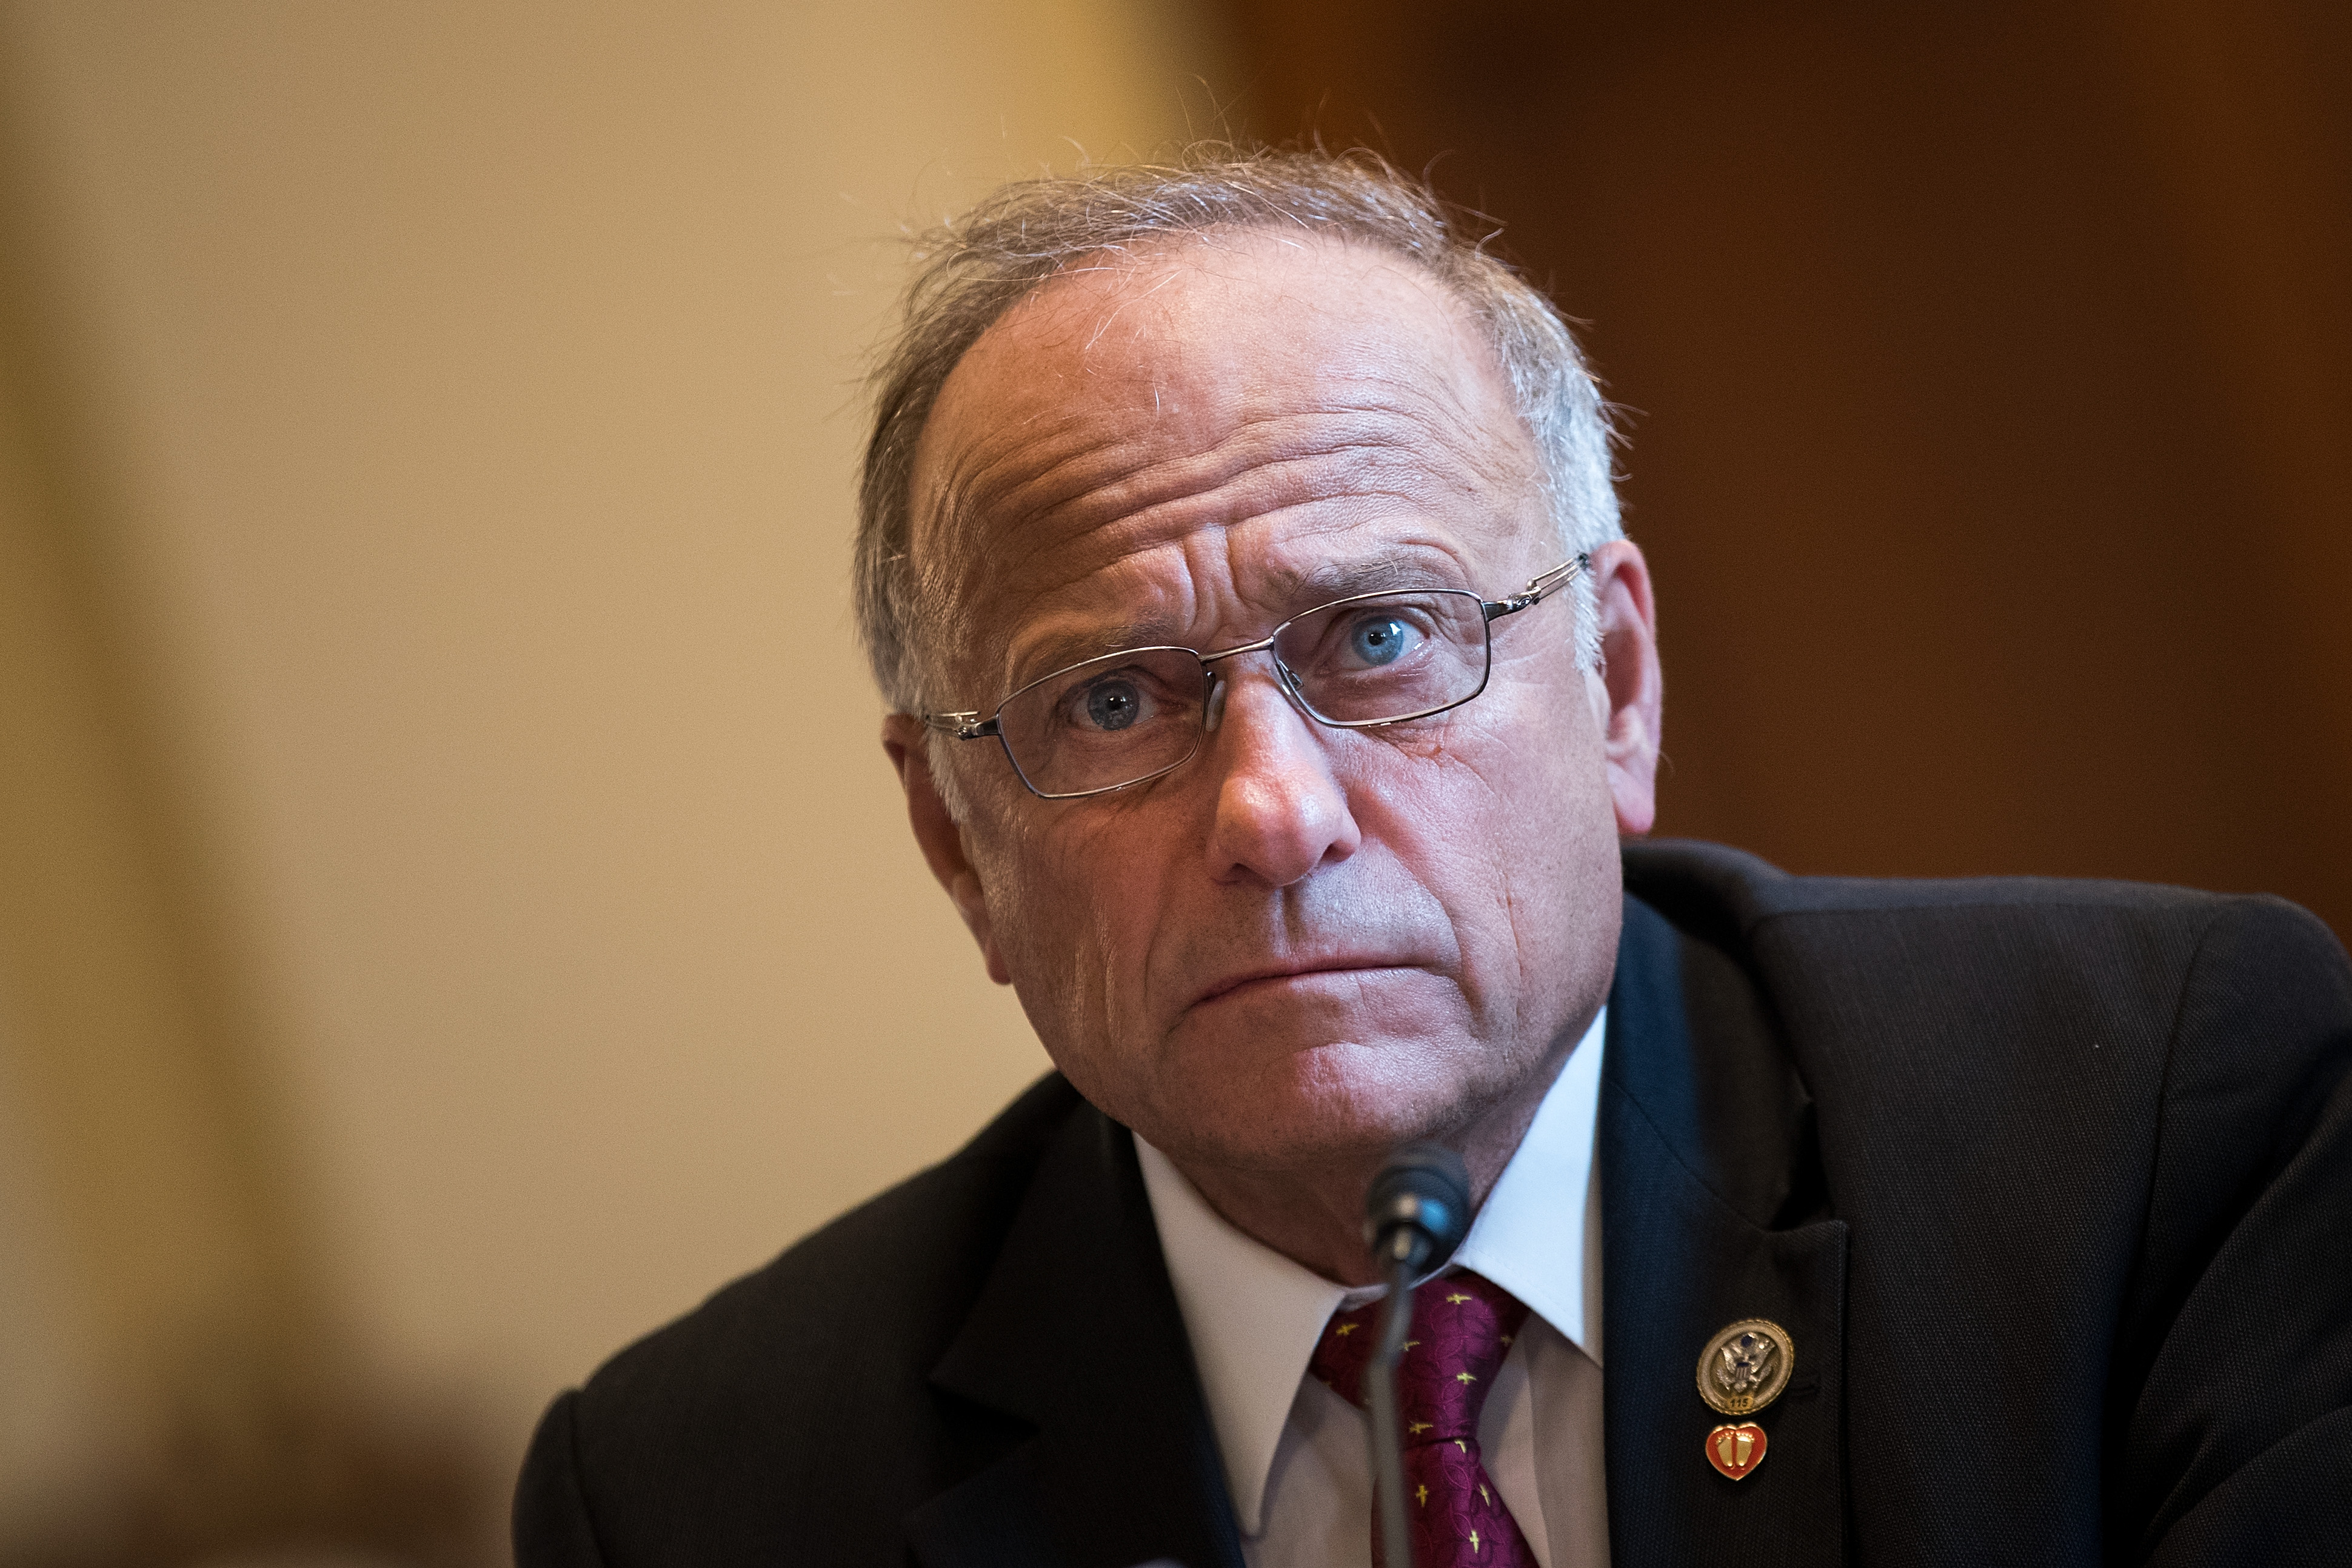 Rep. Steve King testifies during a House Veterans' Affairs Committee hearing, September 26, 2017 in Washington, DC.(Photo by Drew Angerer/Getty Images)